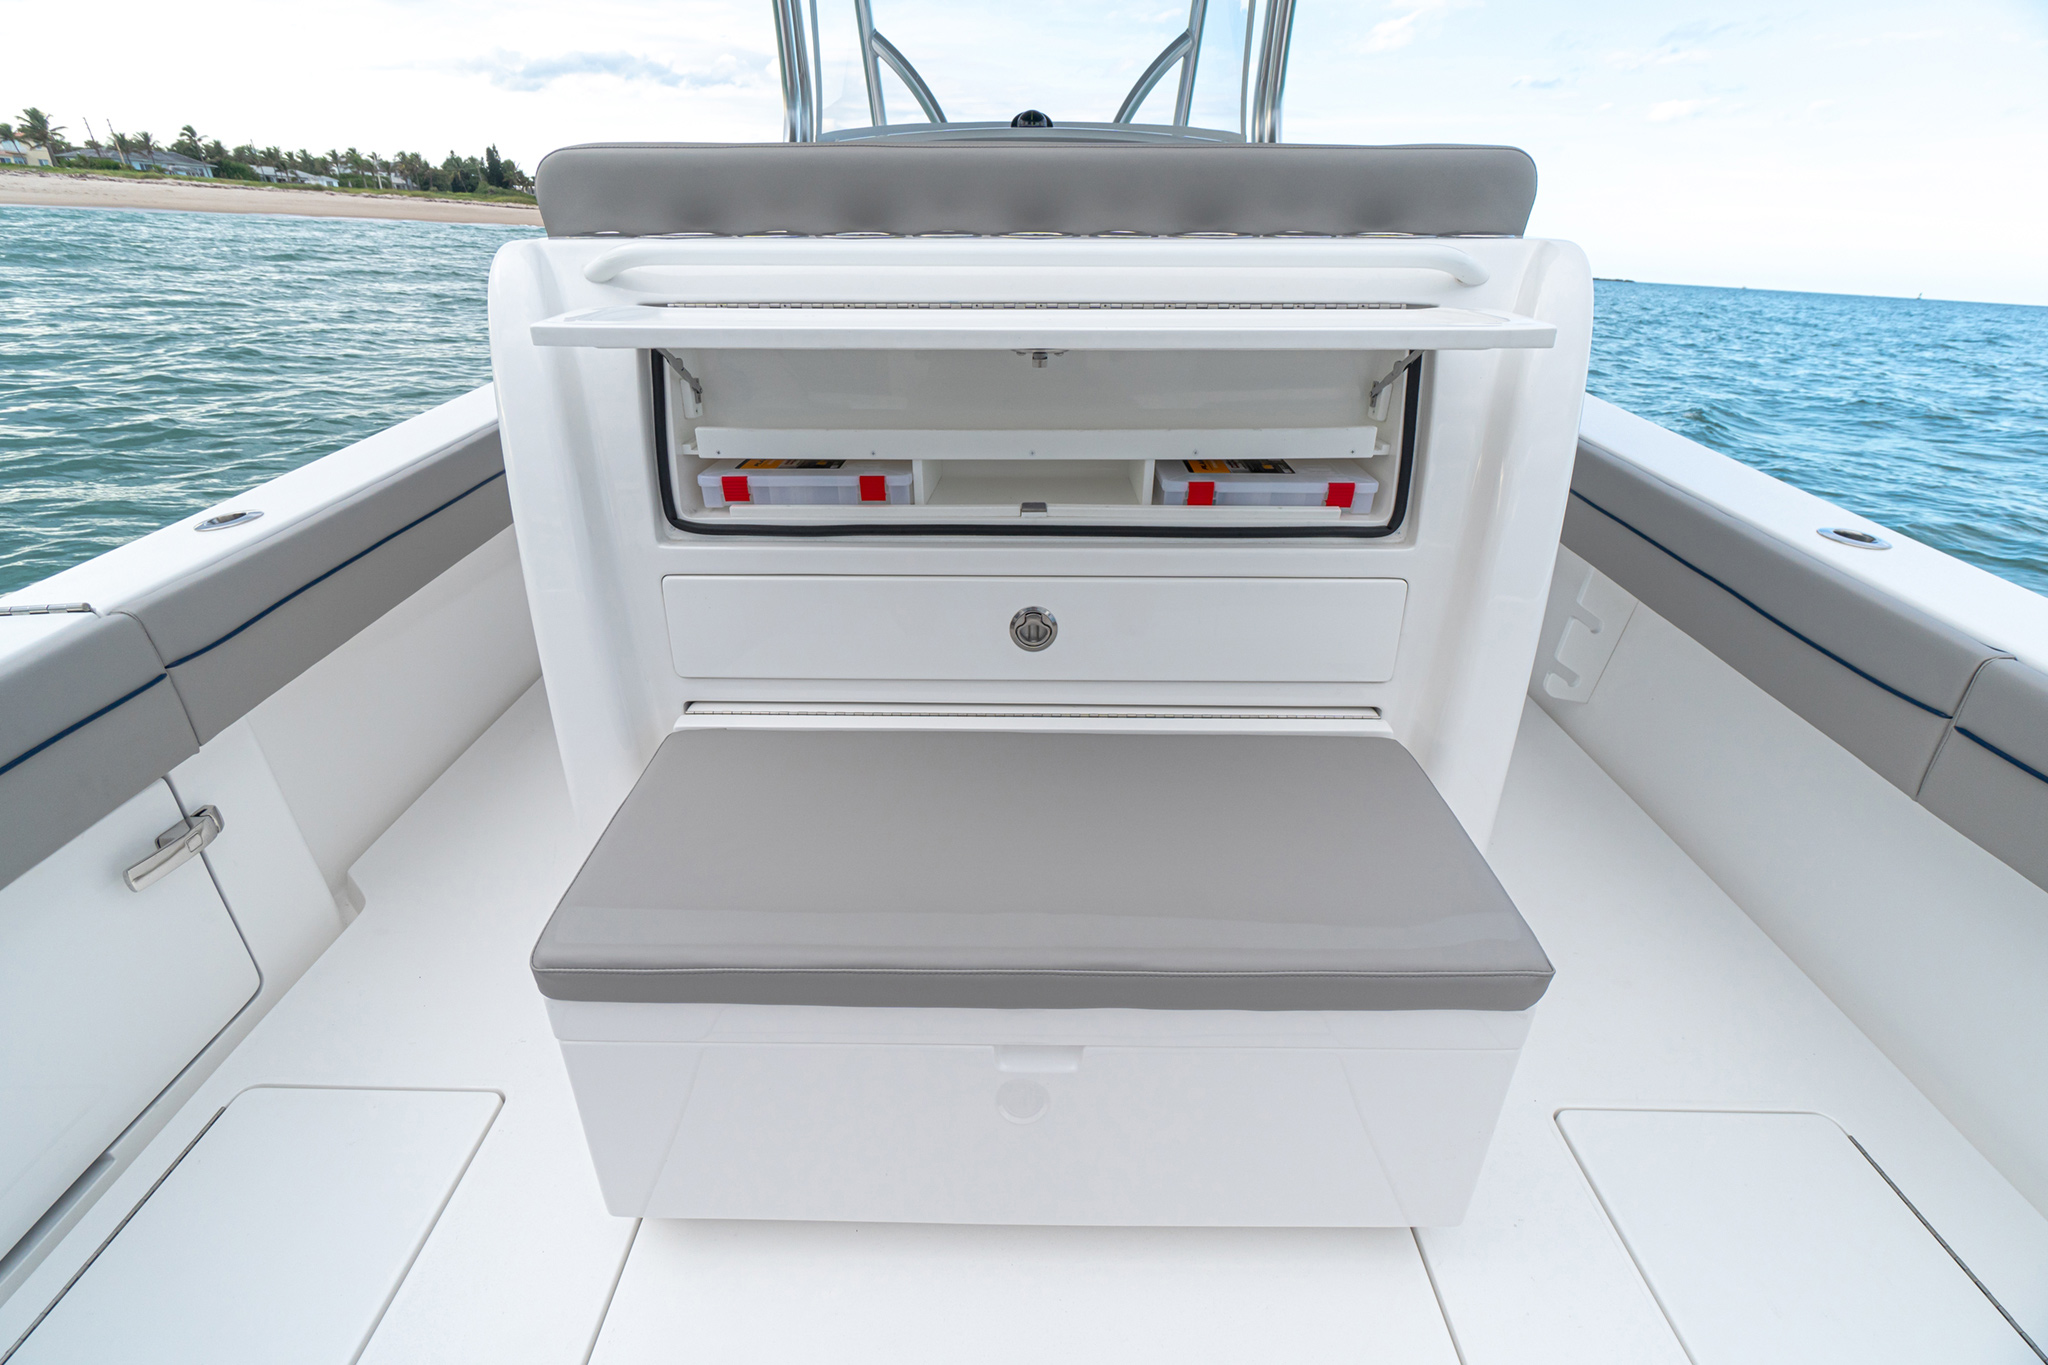 Aft seating module with pull-out cooler, tackle and drawer storage.